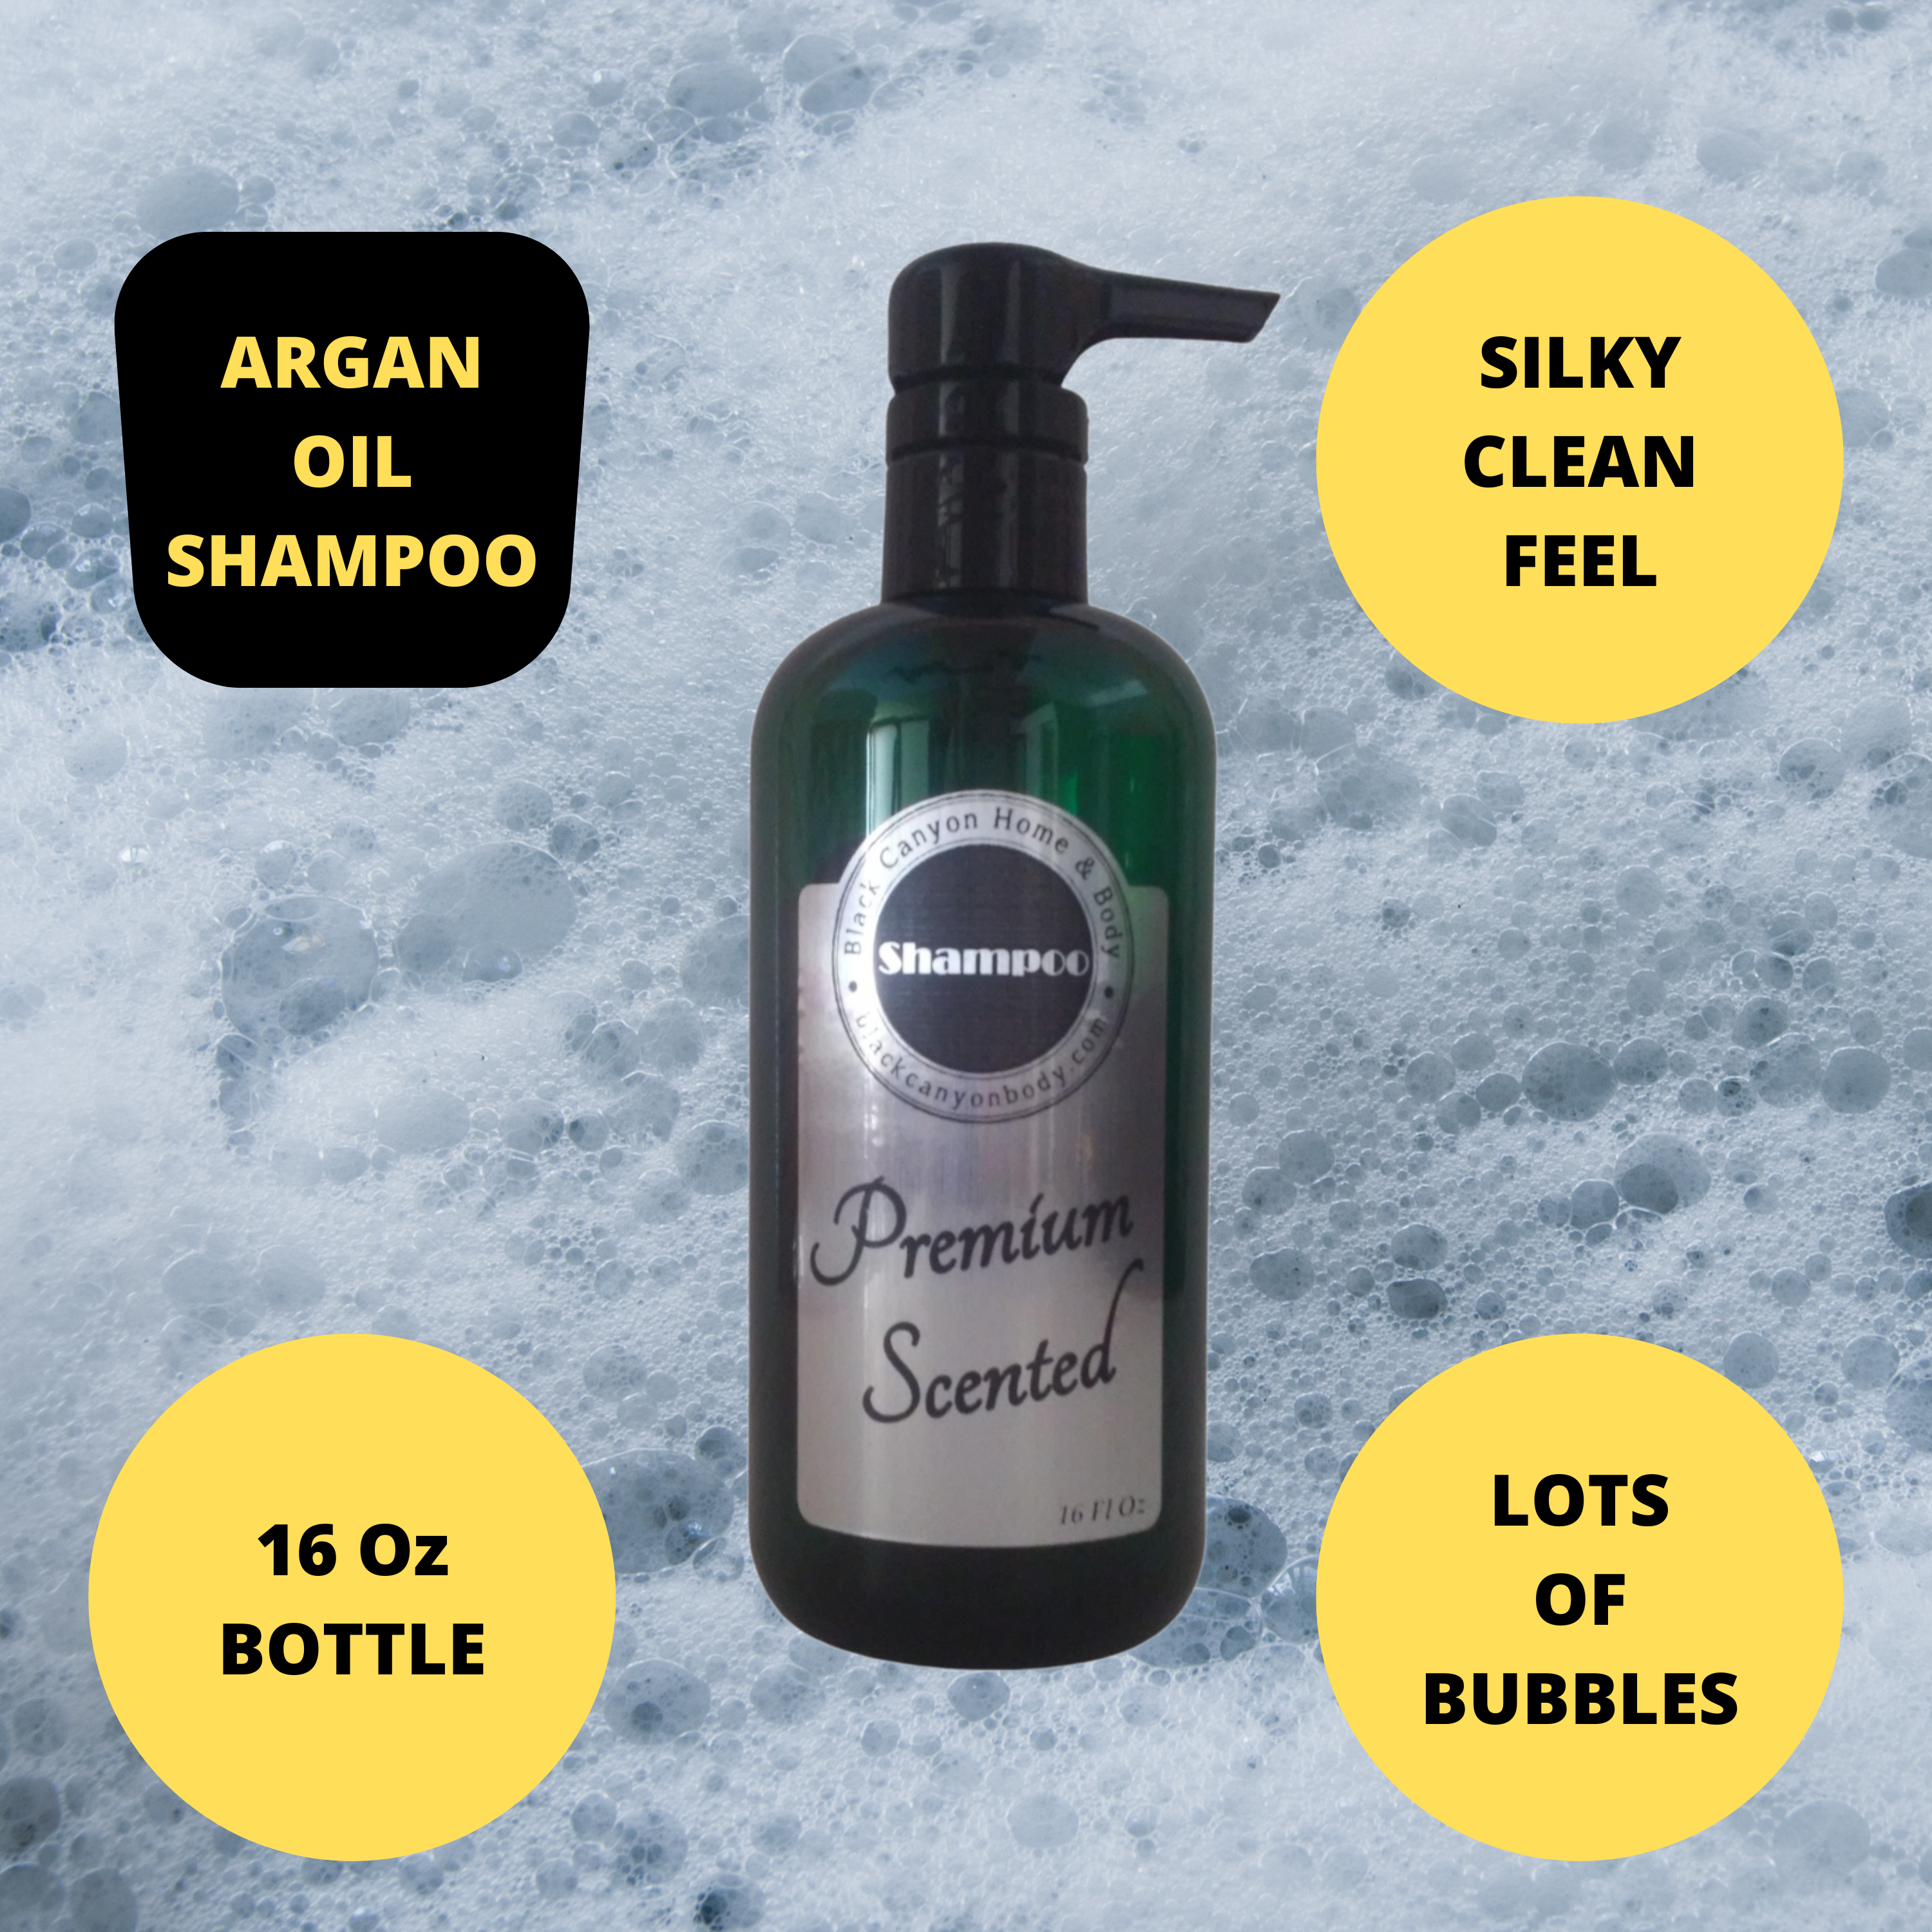 Black Canyon Caribbean Coconut Scented Shampoo with Argan Oil